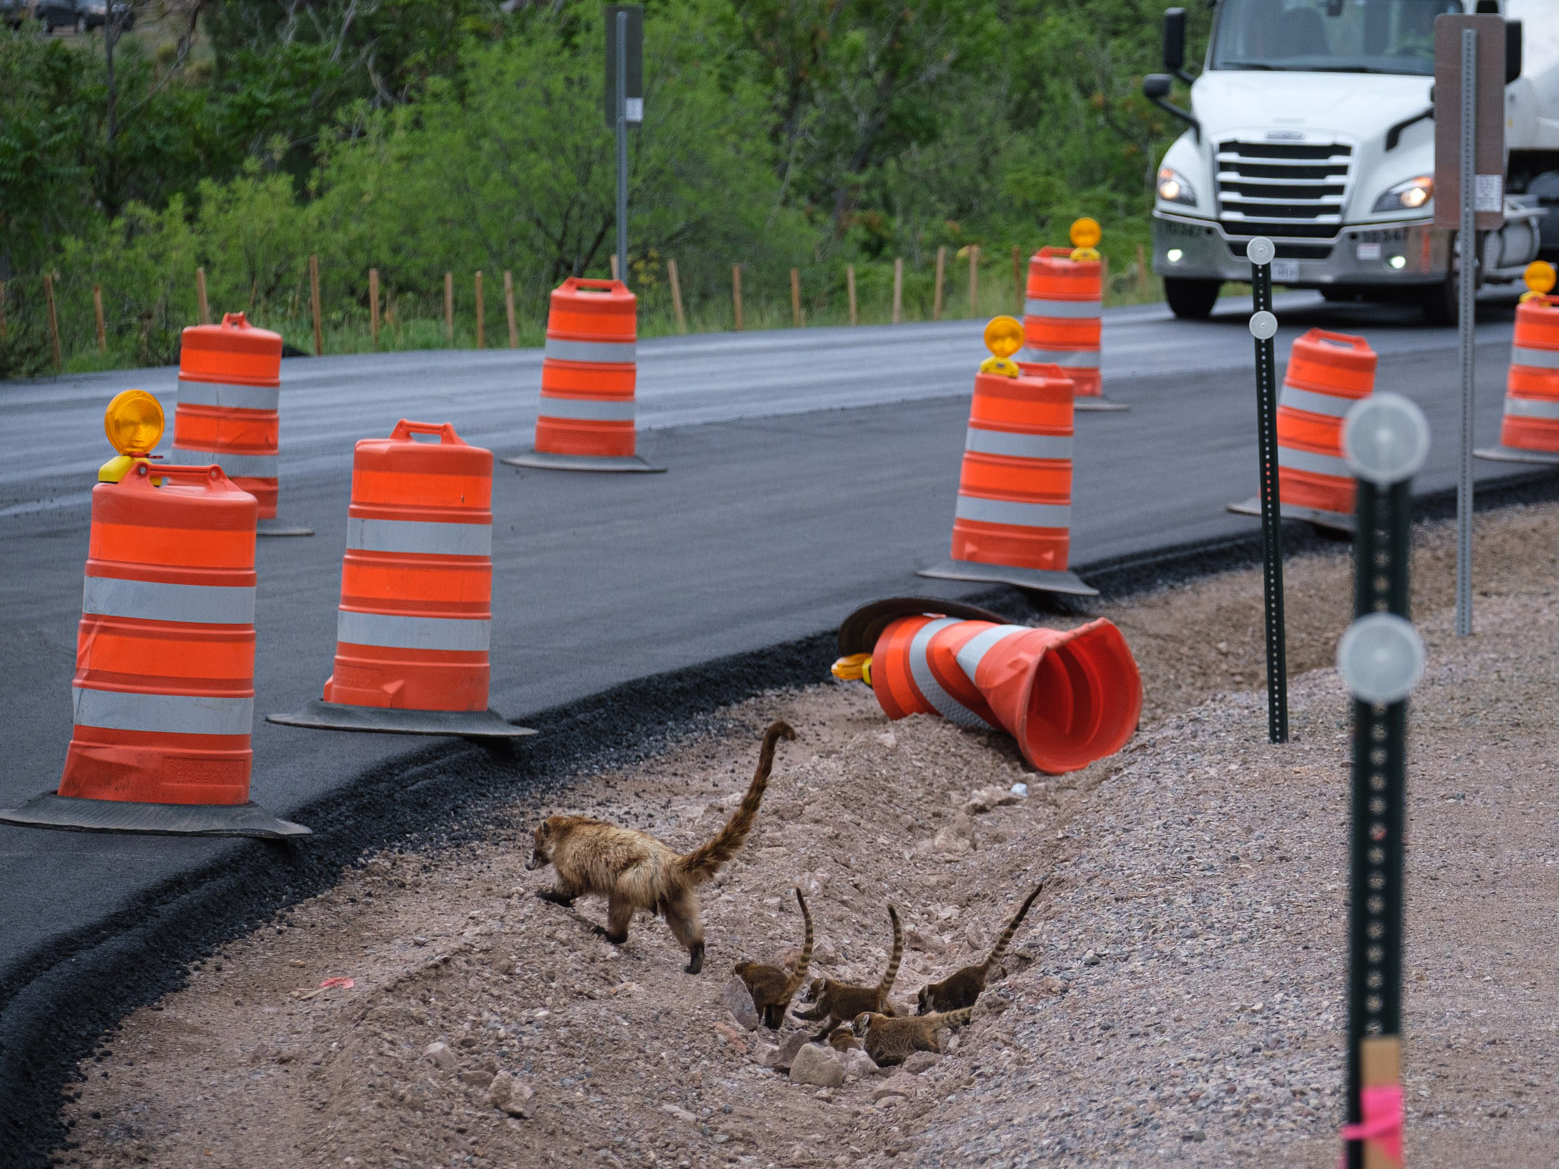 A photo of cones at the side of the road with small animals wanting to cross the road